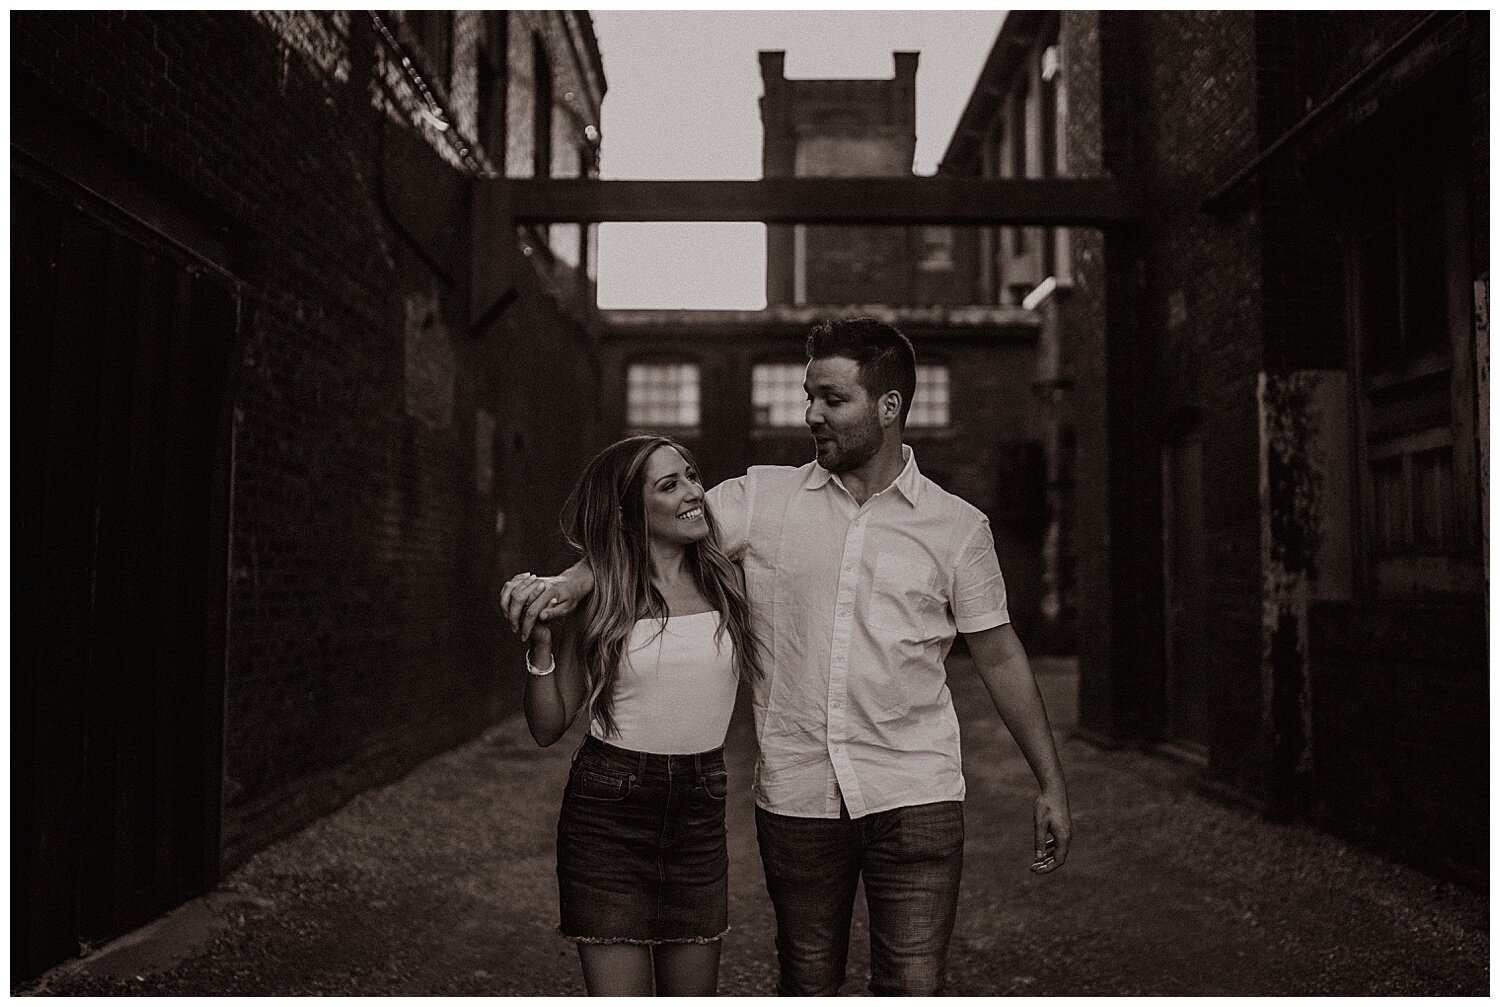 Cotton_Factory_And_Waterfall_Engagement_Session_Hamilton_Ontario_Wedding_Photographer_0080.jpg